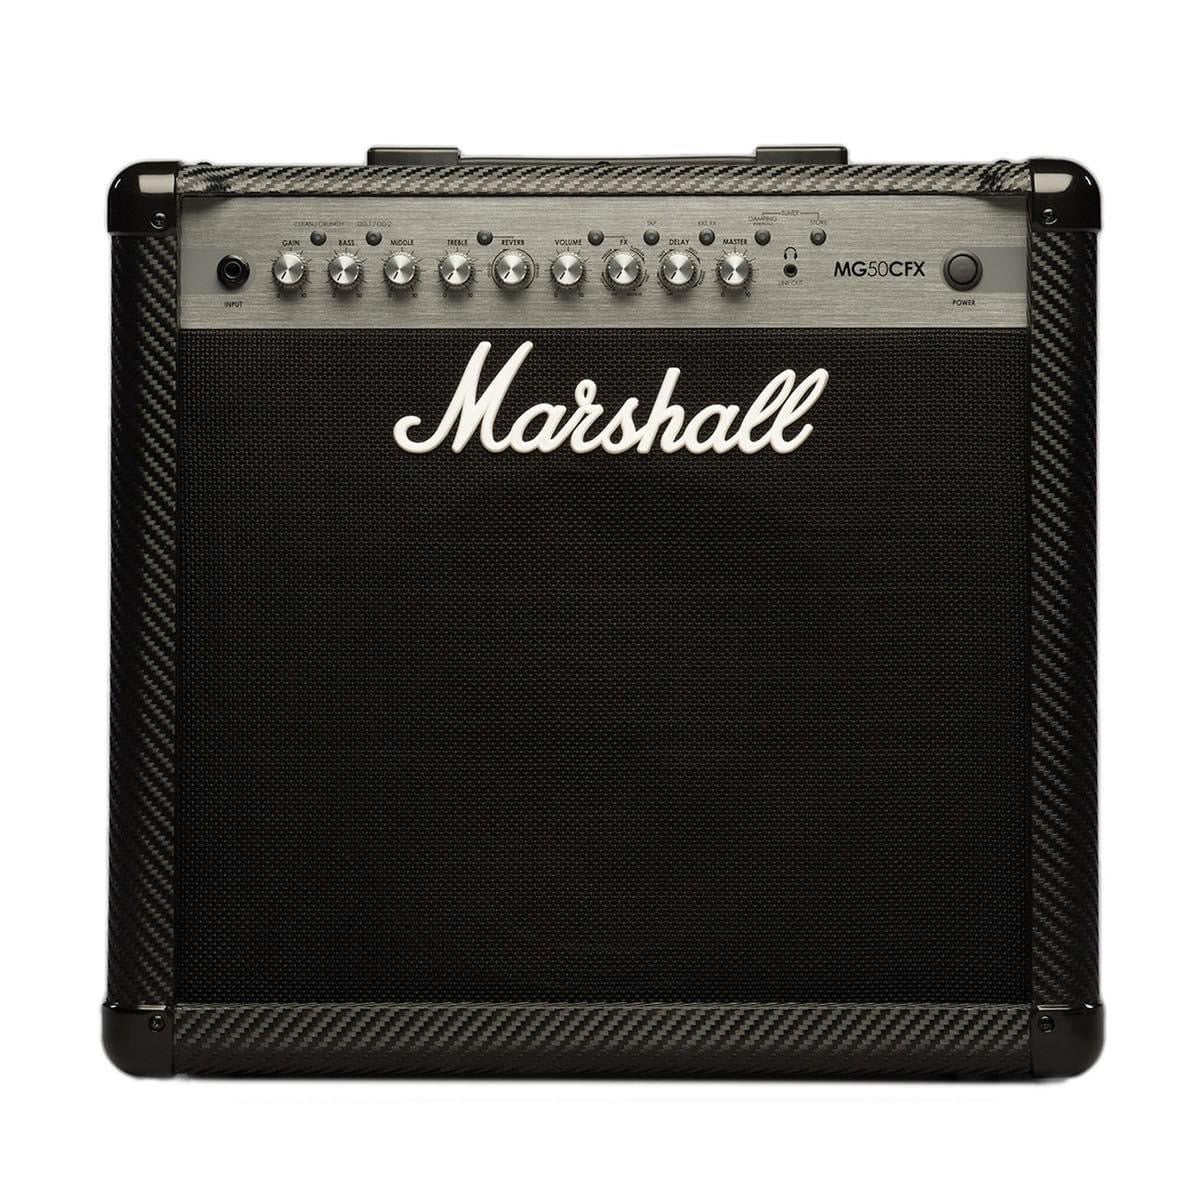 Marshall MG50CFX 4-Channel Solid-State Combo Amplifier with Presets and FX (50W)